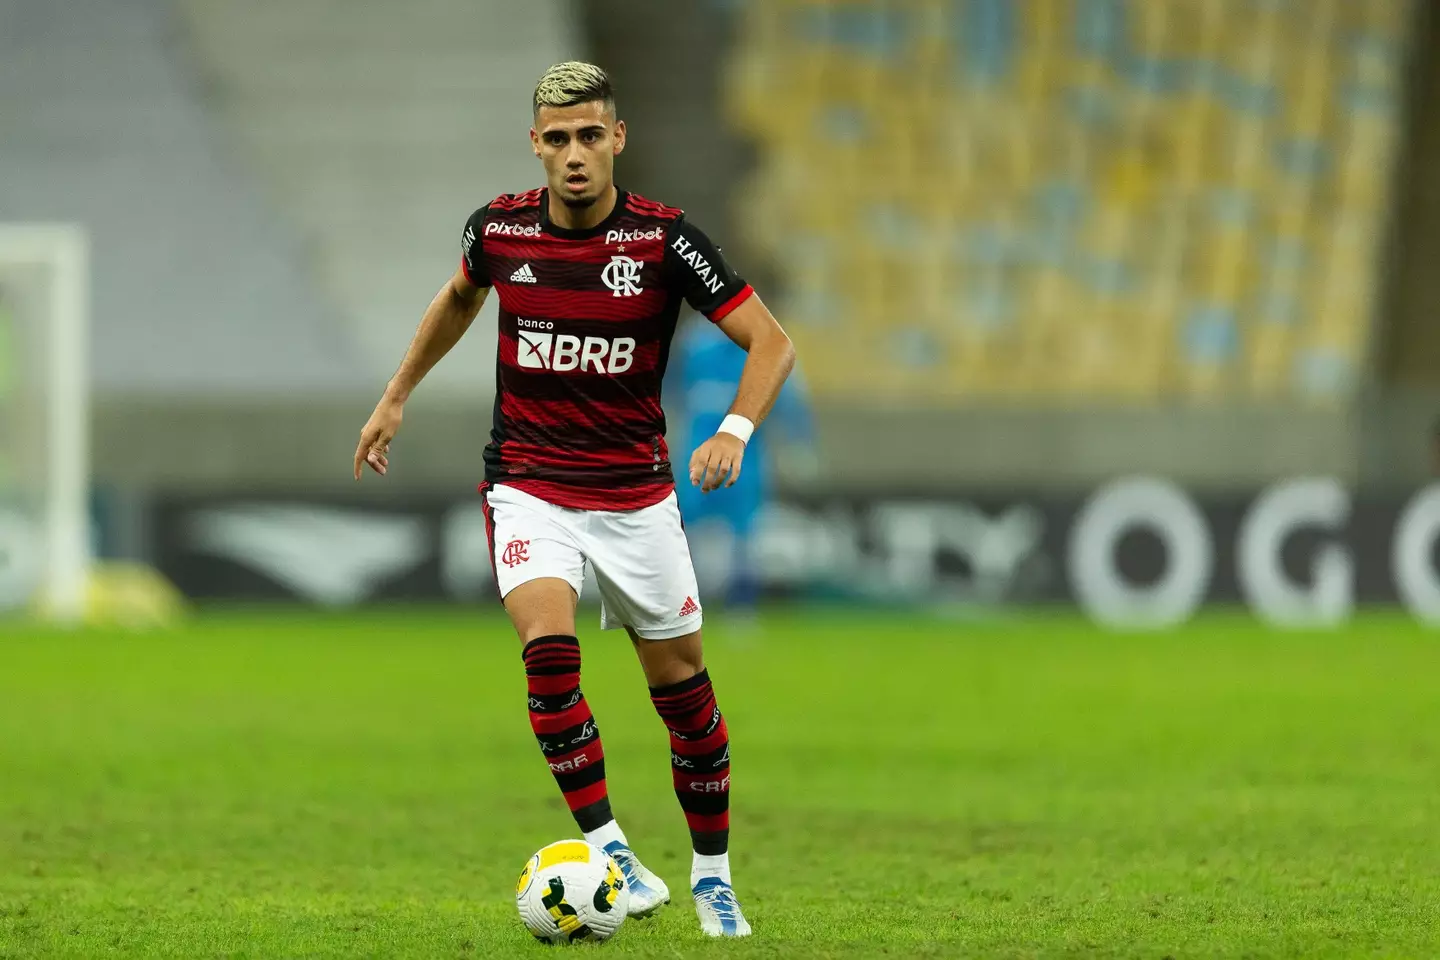 Andreas Pereira of Manchester United on loan at Flamengo (Alamy)